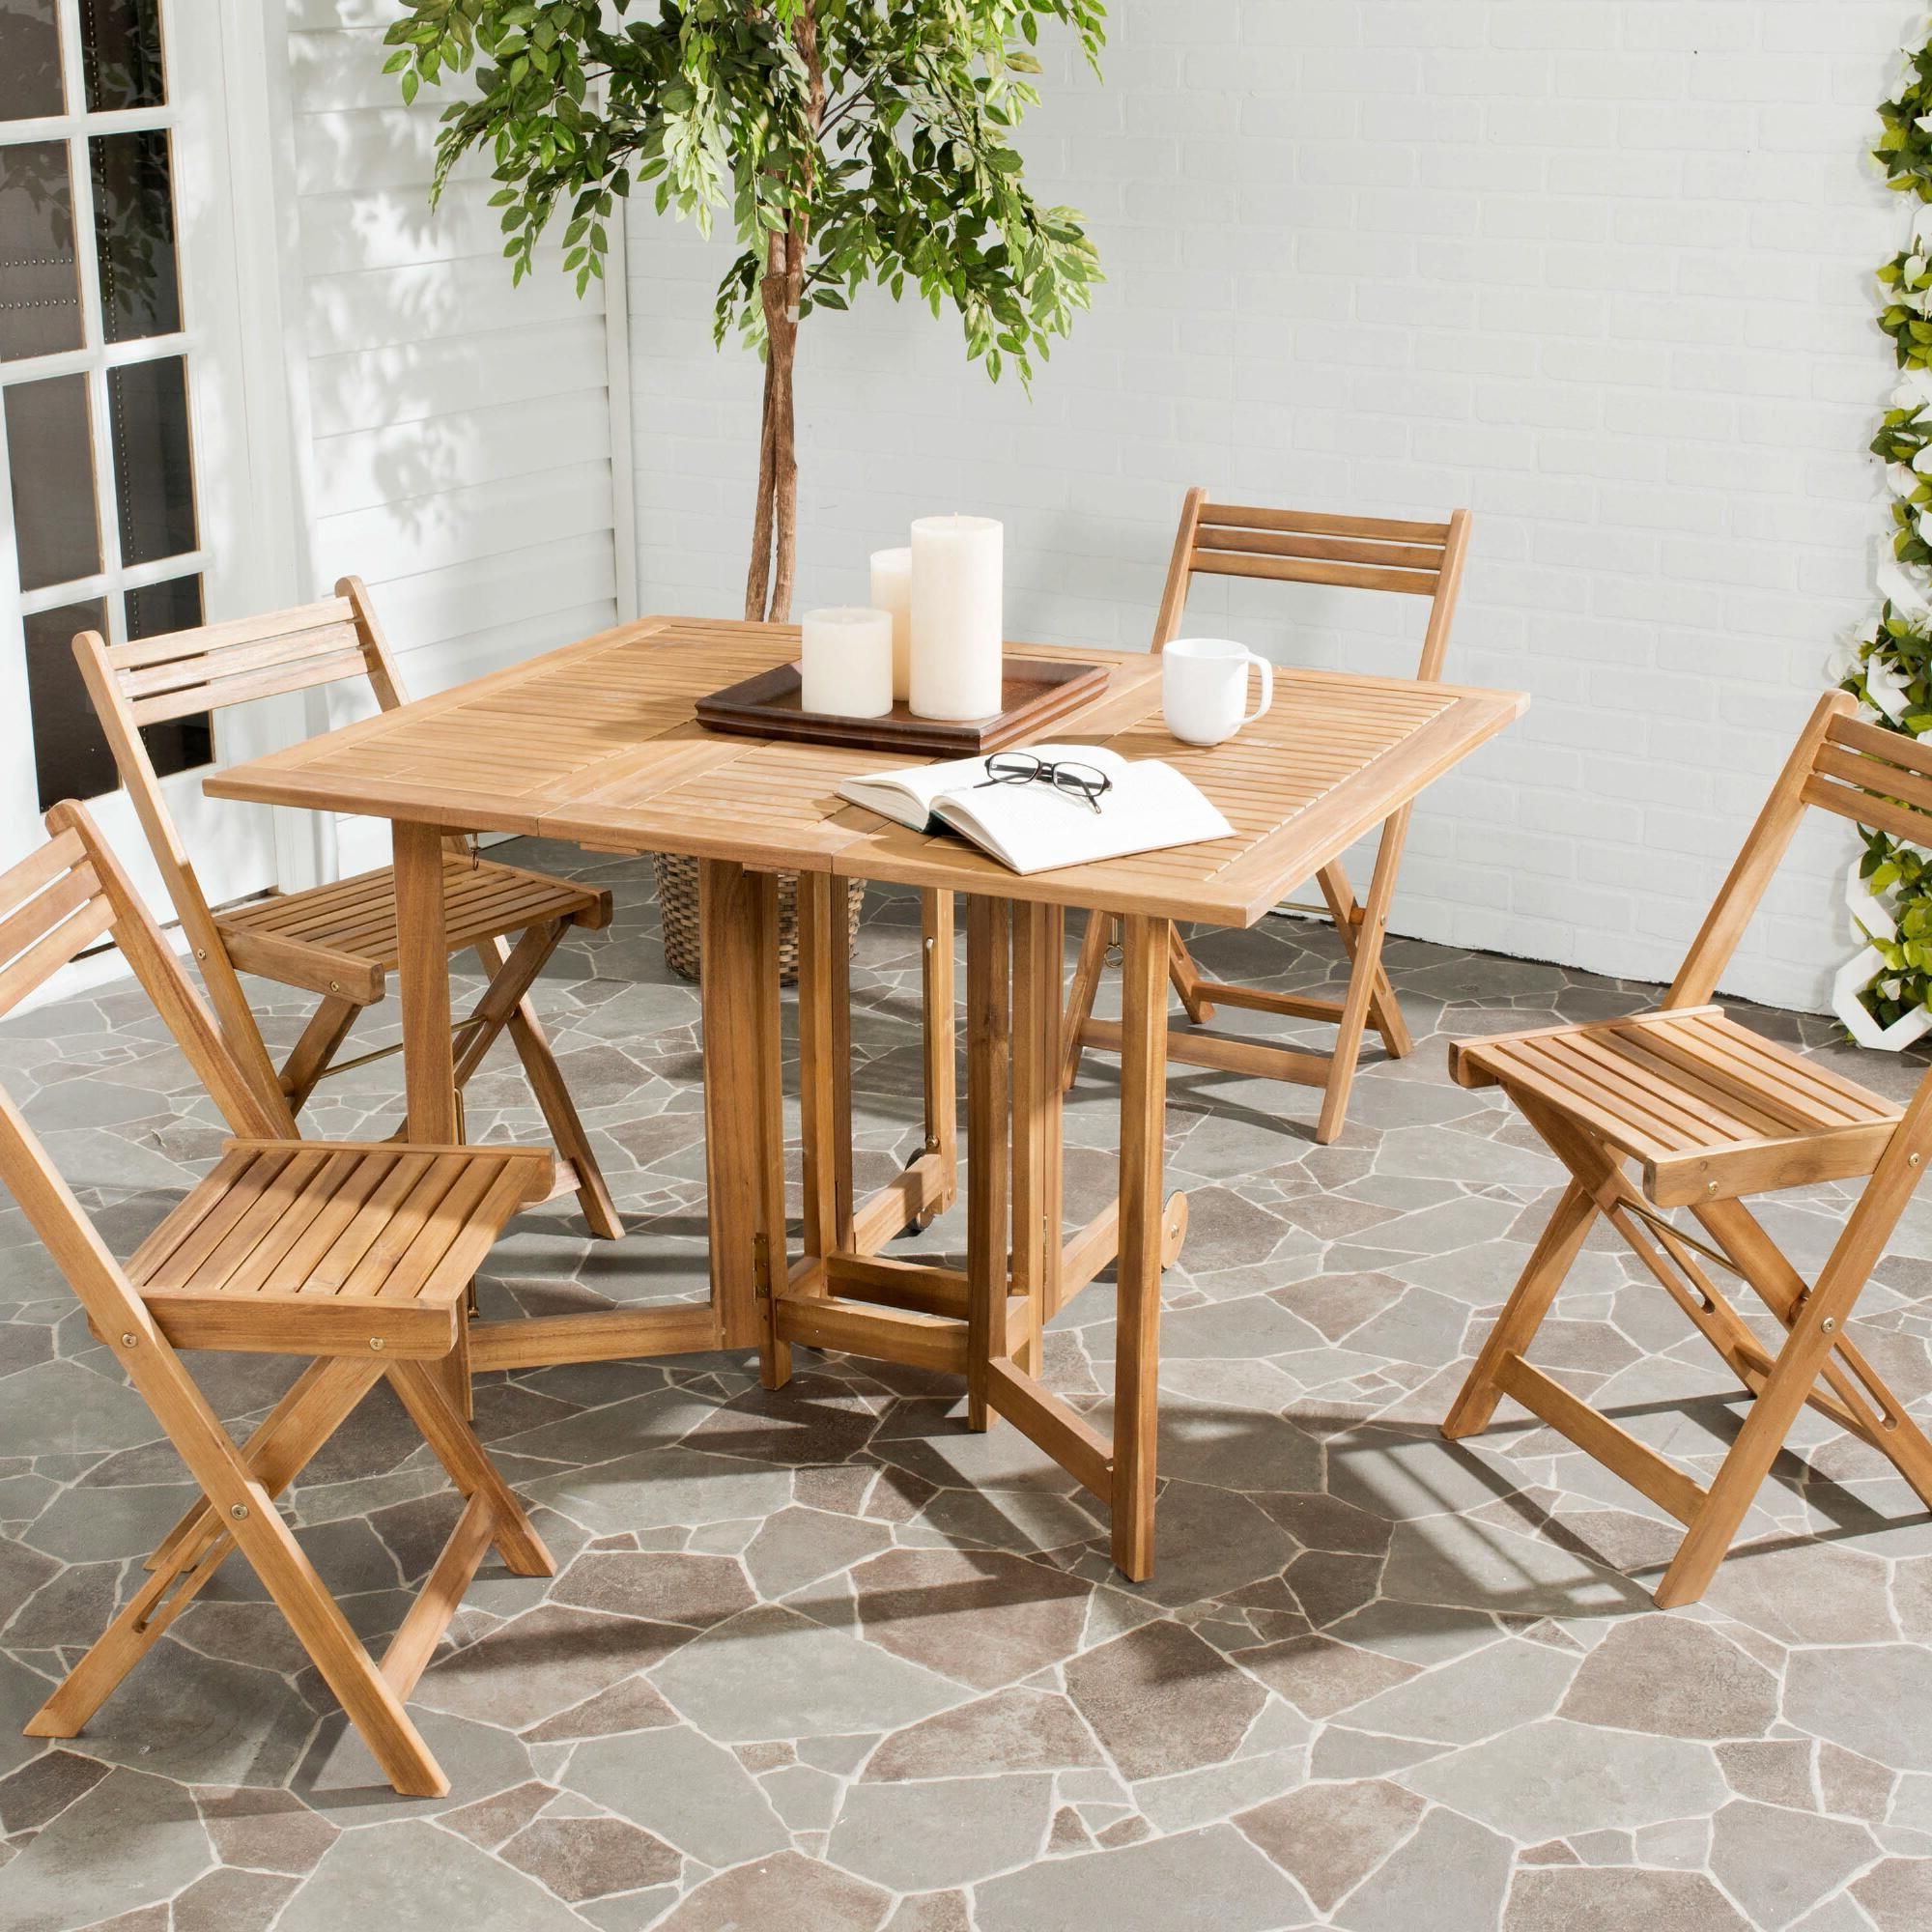 Wood Rectangular Outdoor Dining Sets Within Widely Used Natural Wood Holcut Rectangular 5 Piece Outdoor Dining Set (View 14 of 15)